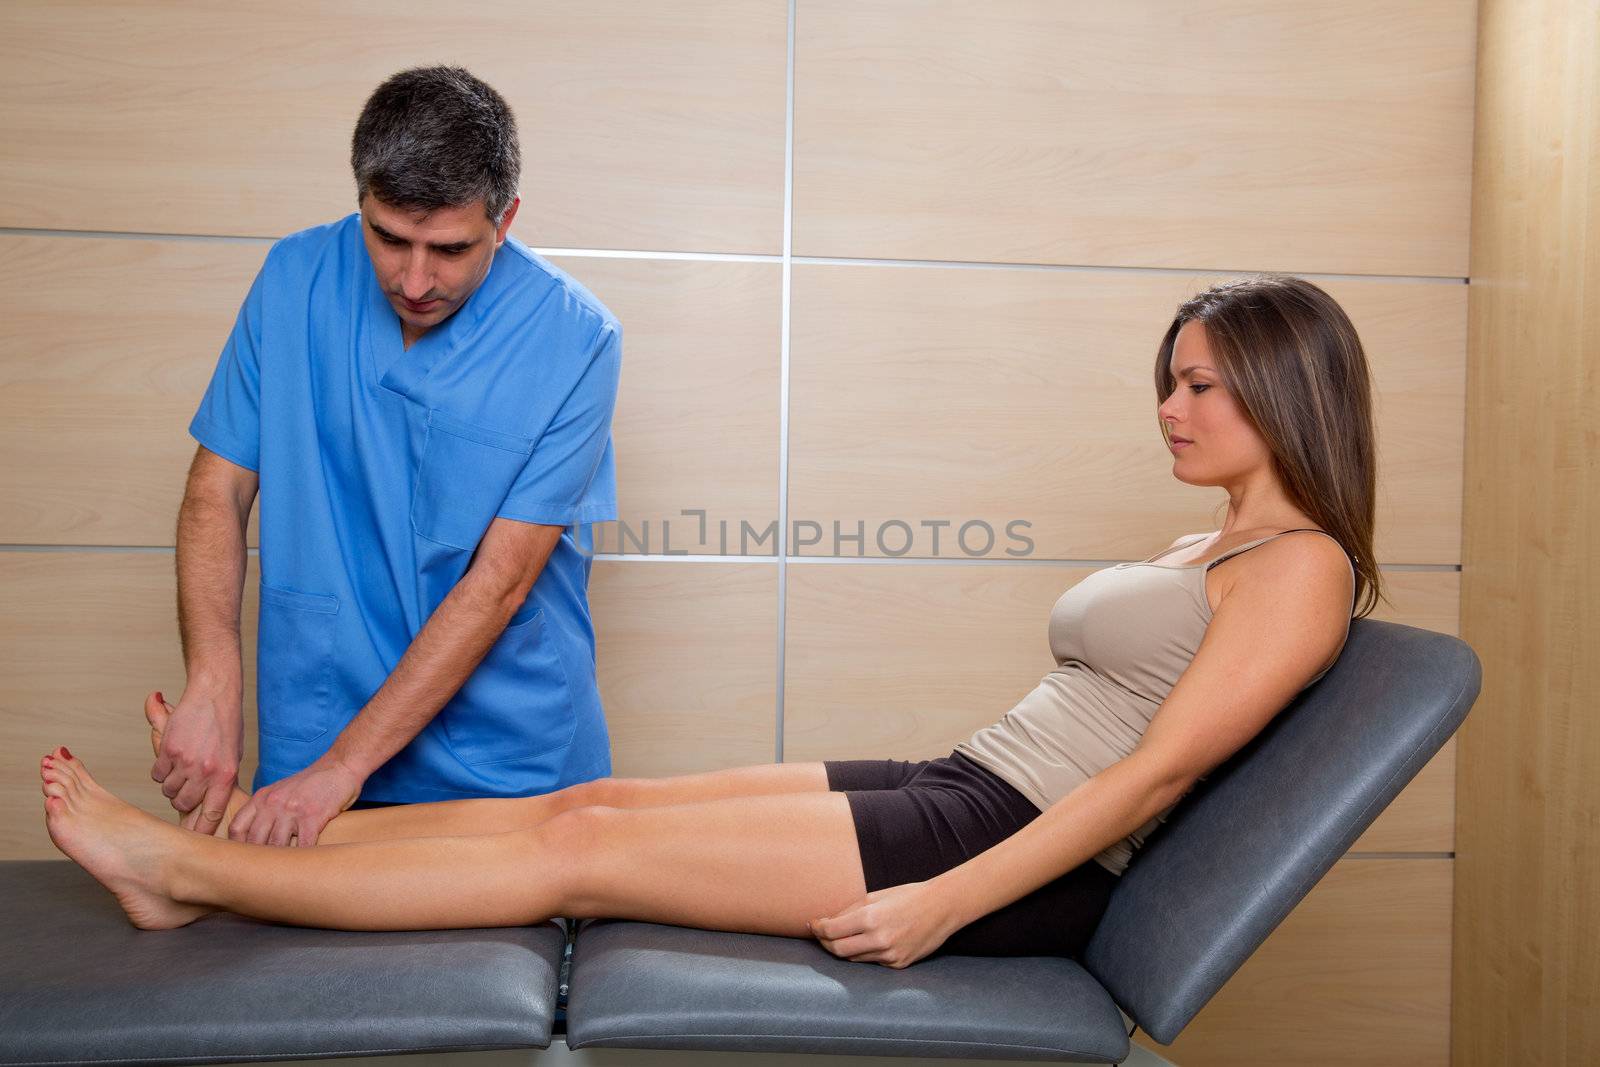 Ankle joint mobilization therapy of doctor man to patient woman in hospital